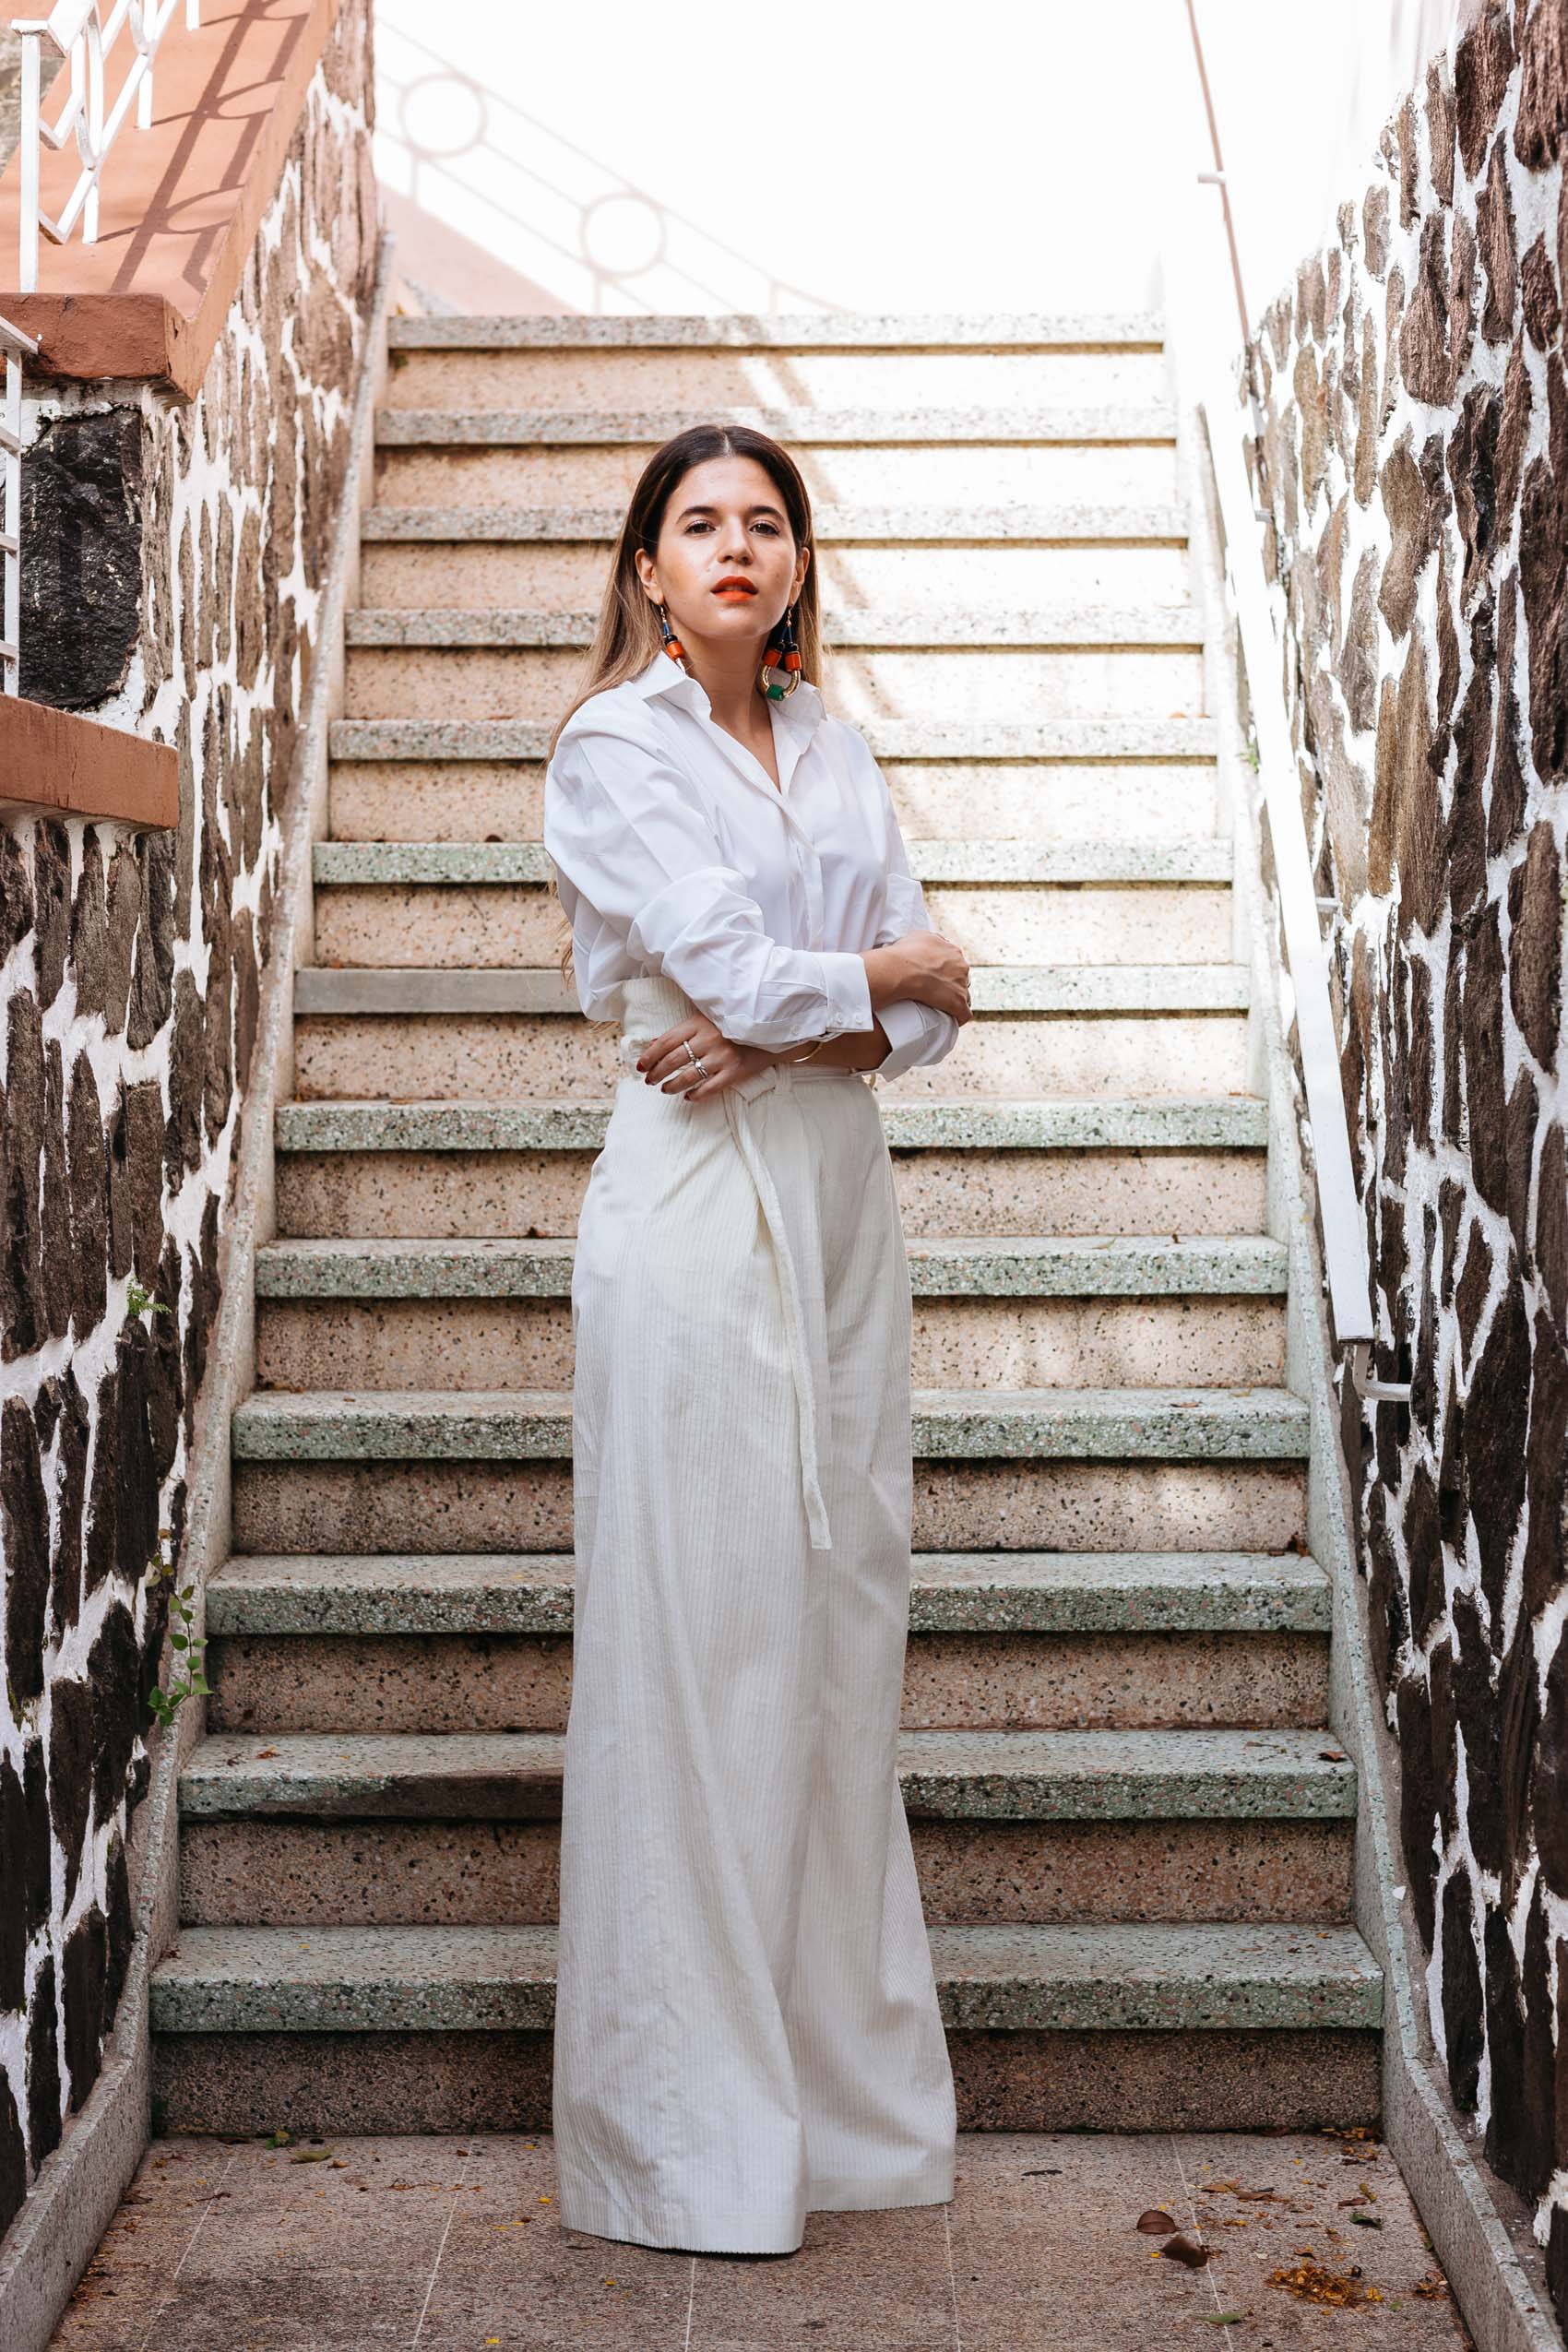 Maristella wears a white shirt and high waist corduroy pants from H&M Studio AW16 collection